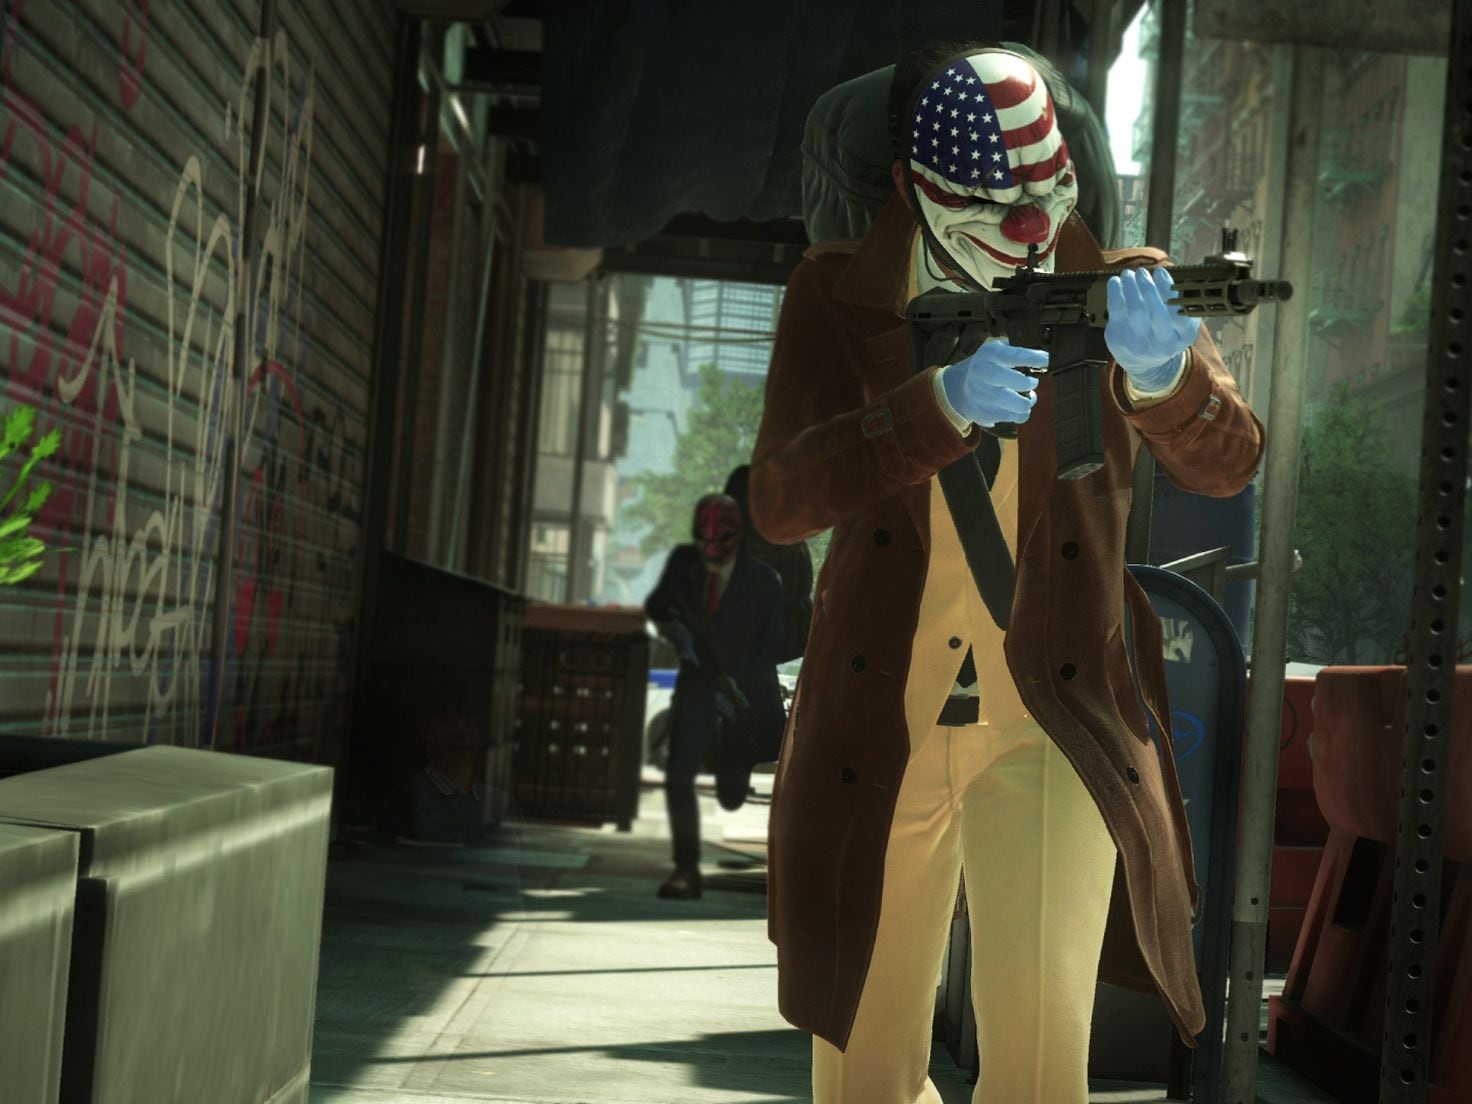 Watch Dogs Legion is Epic exclusive, skipping Steam